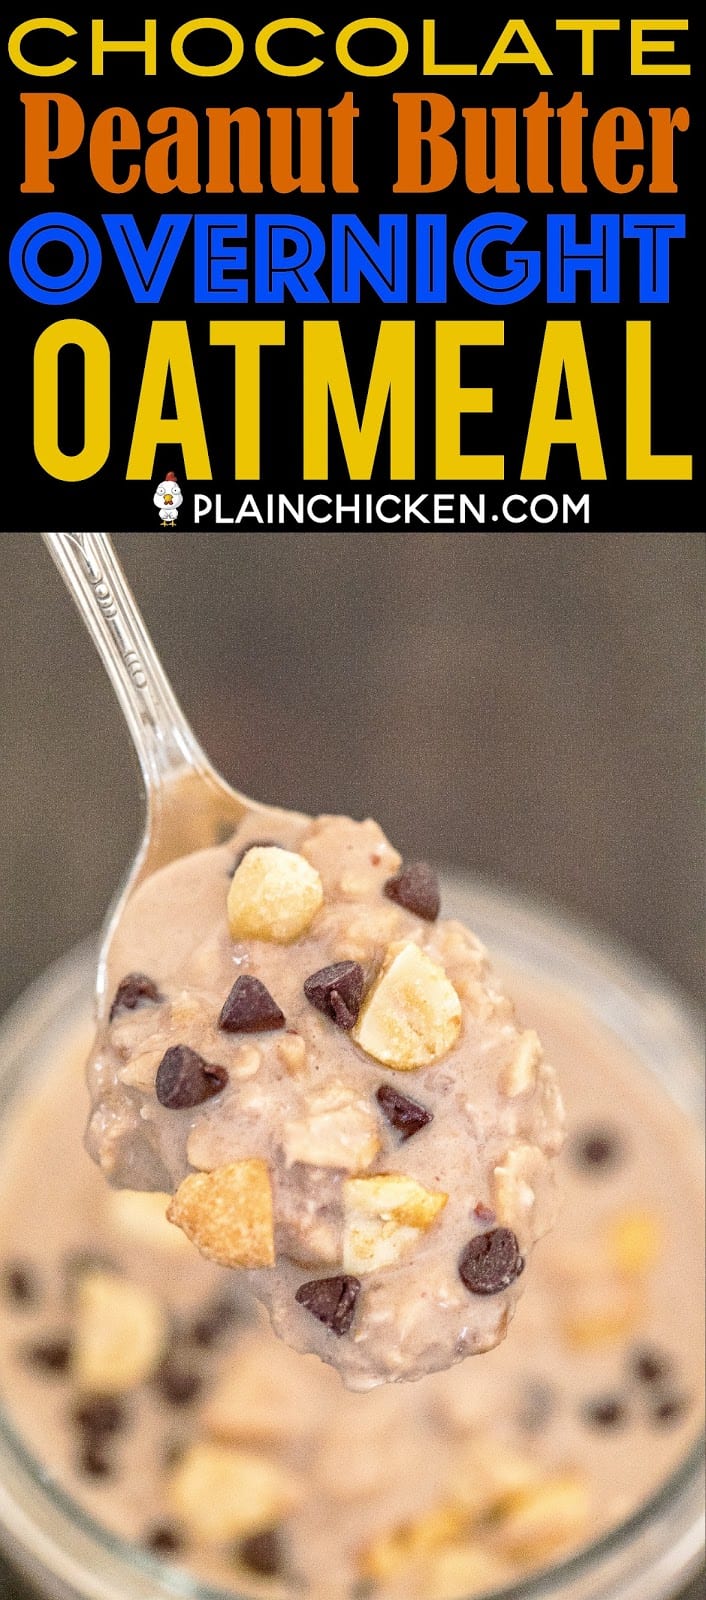 Chocolate Peanut Butter Overnight Oatmeal - perfect for breakfast or an afternoon pick-me-up. Loaded with protein! Oatmeal, Greek yogurt, Reese's Coffee Creamer and peanut butter. Stir it all together in a mason jar for easy clean up. Tastes like you are cheating, but you aren't! YUM! #chocolate #peanutbutter #overnightoatmeal